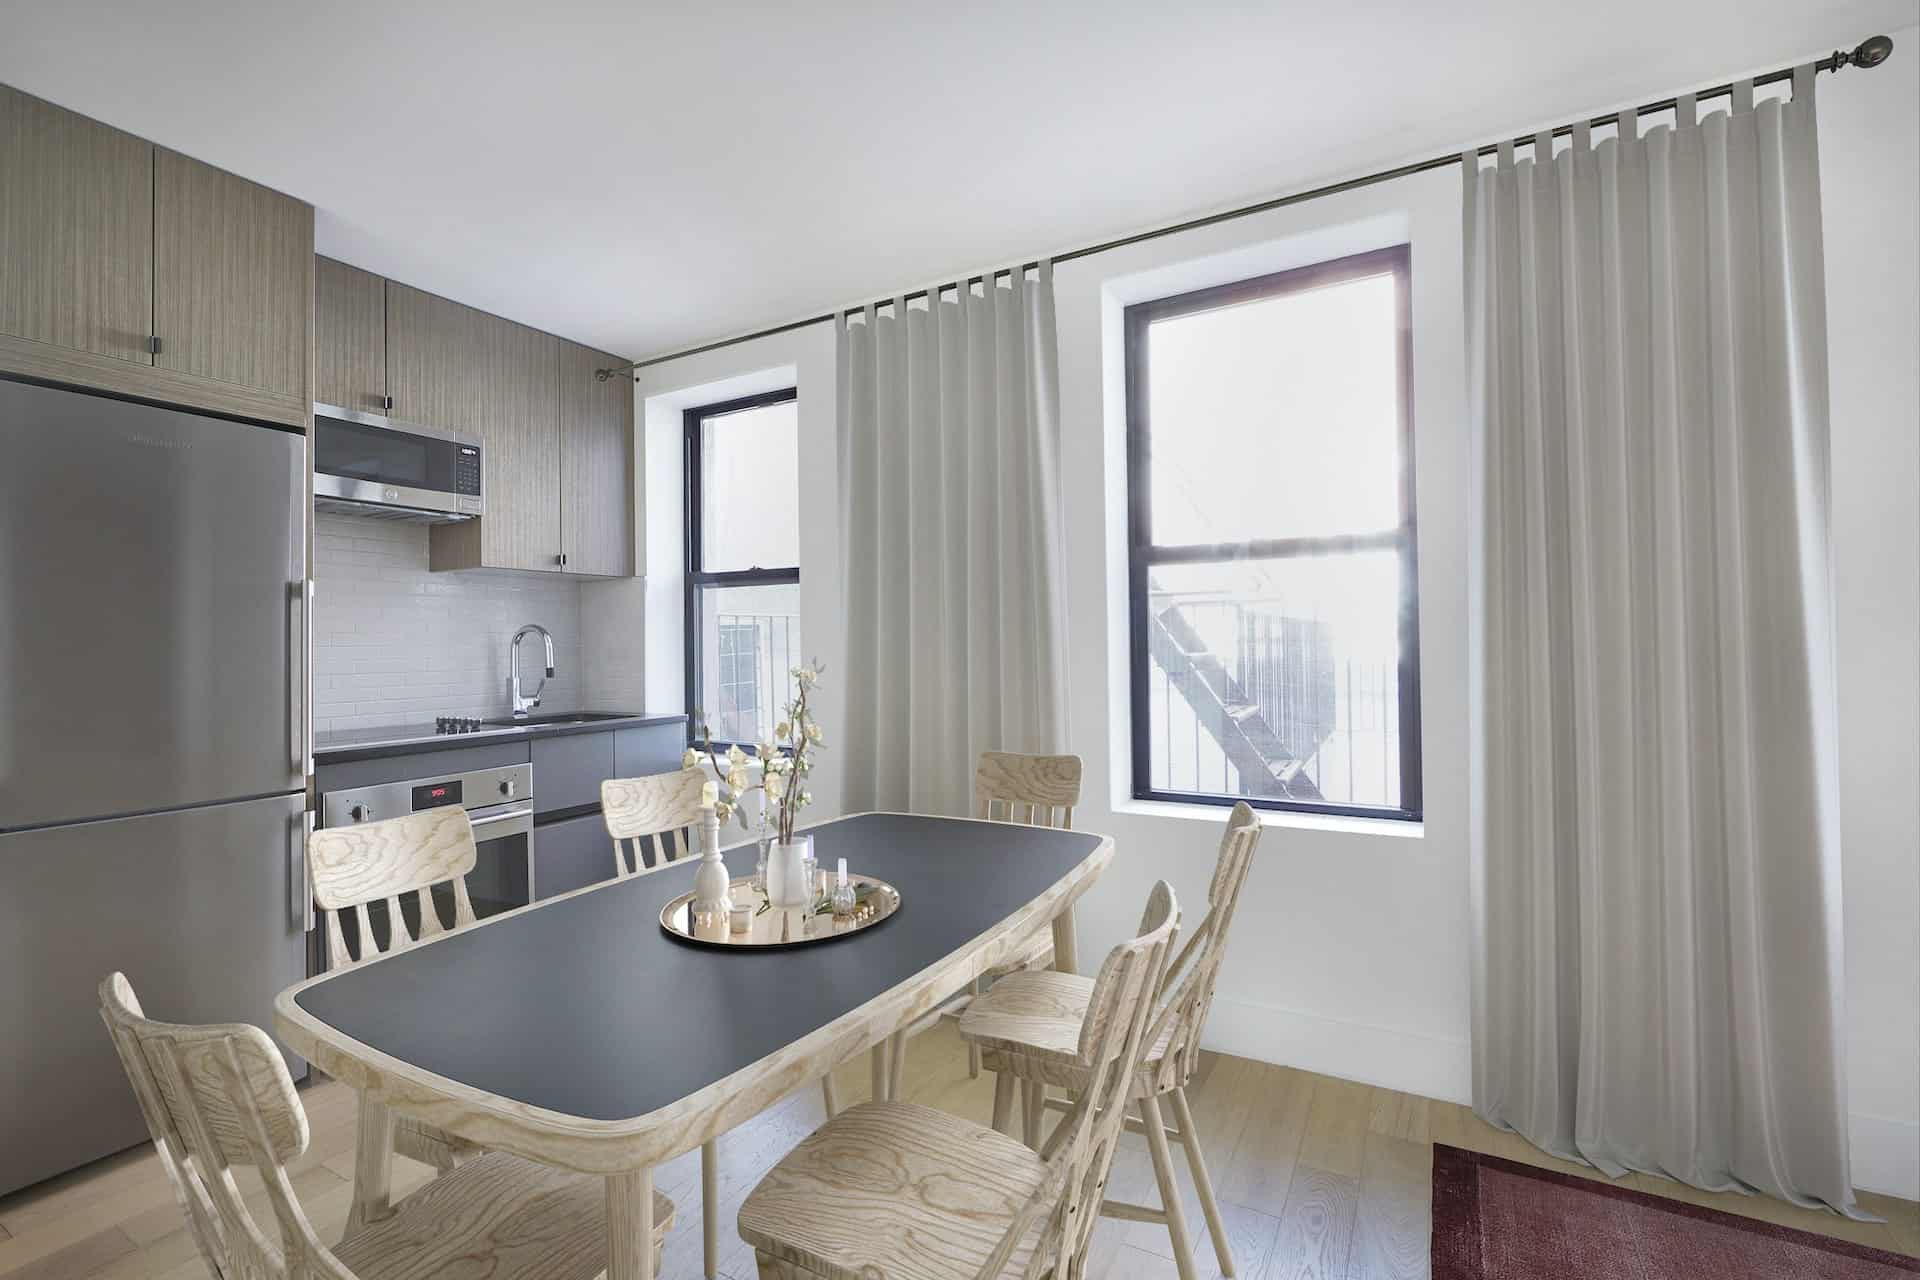 Kitchen at 151-153 Ludlow Street apartments with wood dining table, stainless steel appliances, windows and hardwood floors.